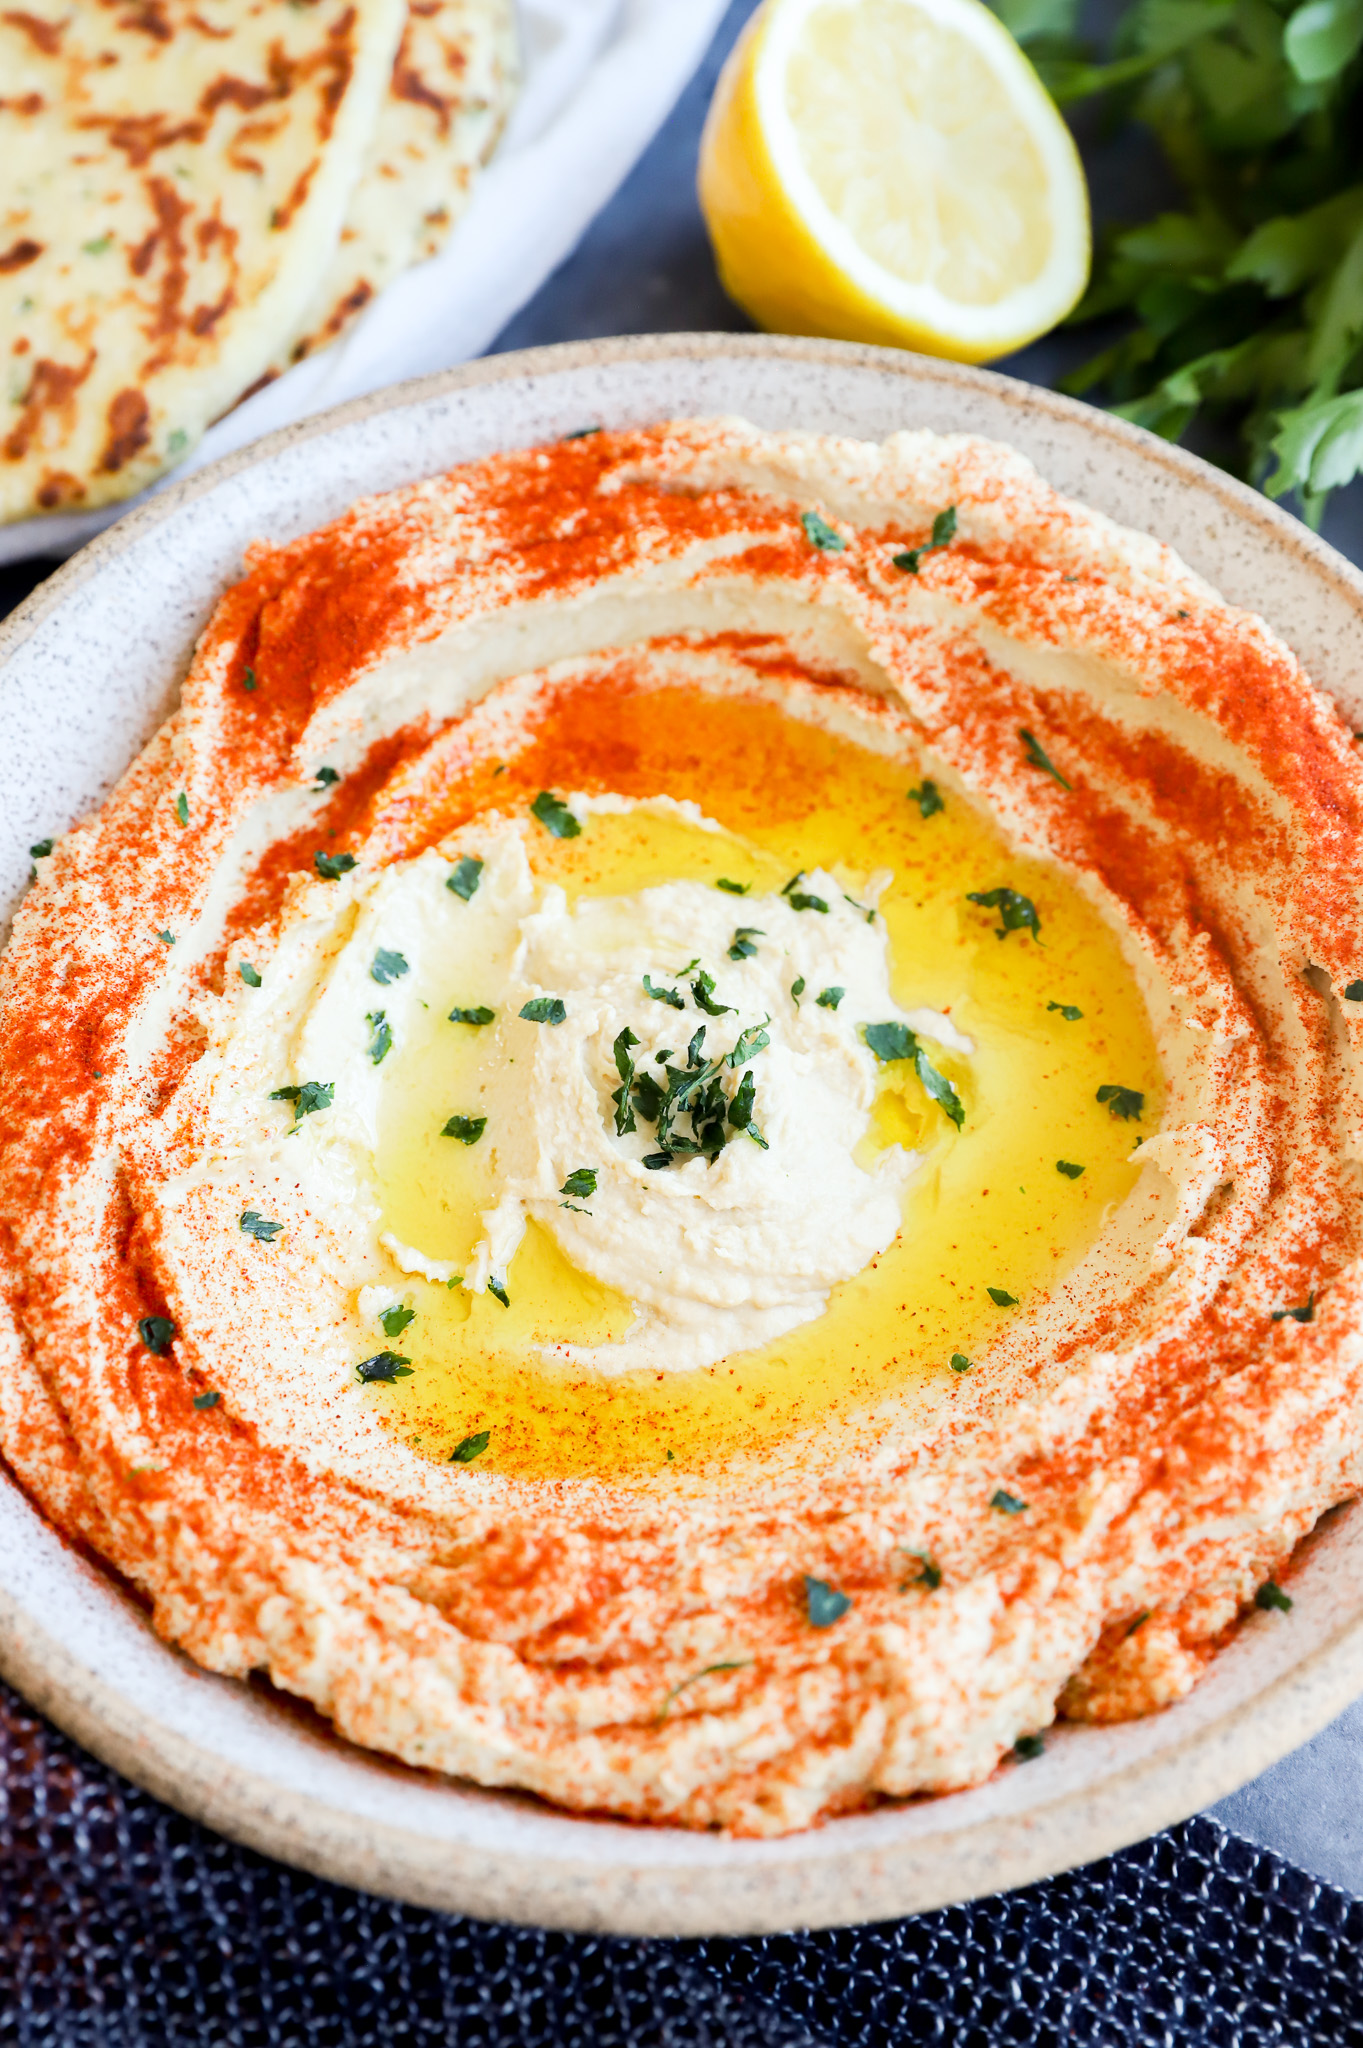 authentic chickpea creamy dip in a bowl with olive oil and sumac